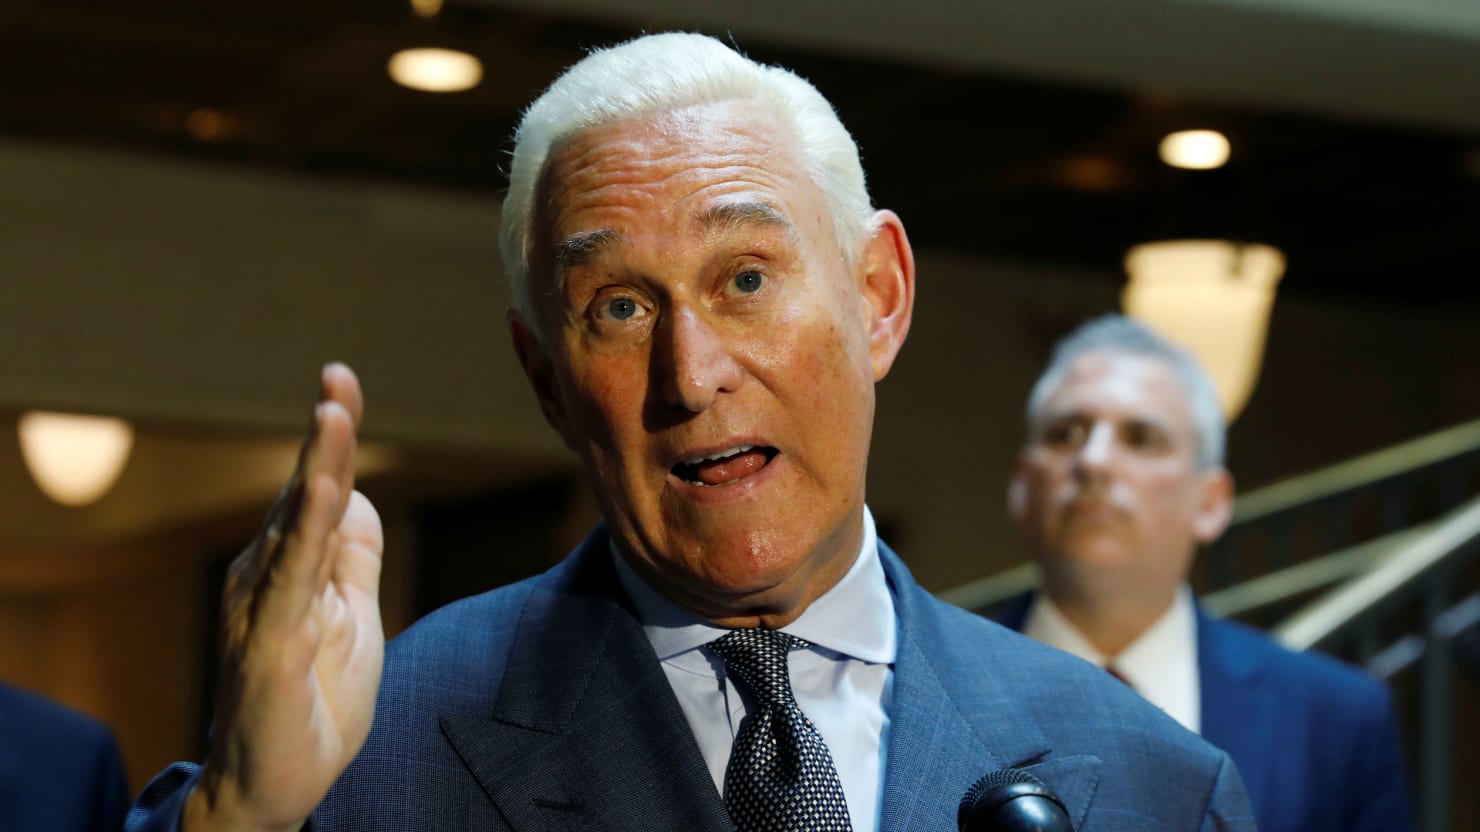 Roger Stone: Sam Nunberg Is a 'Lying Asshole' and 'Psycho'